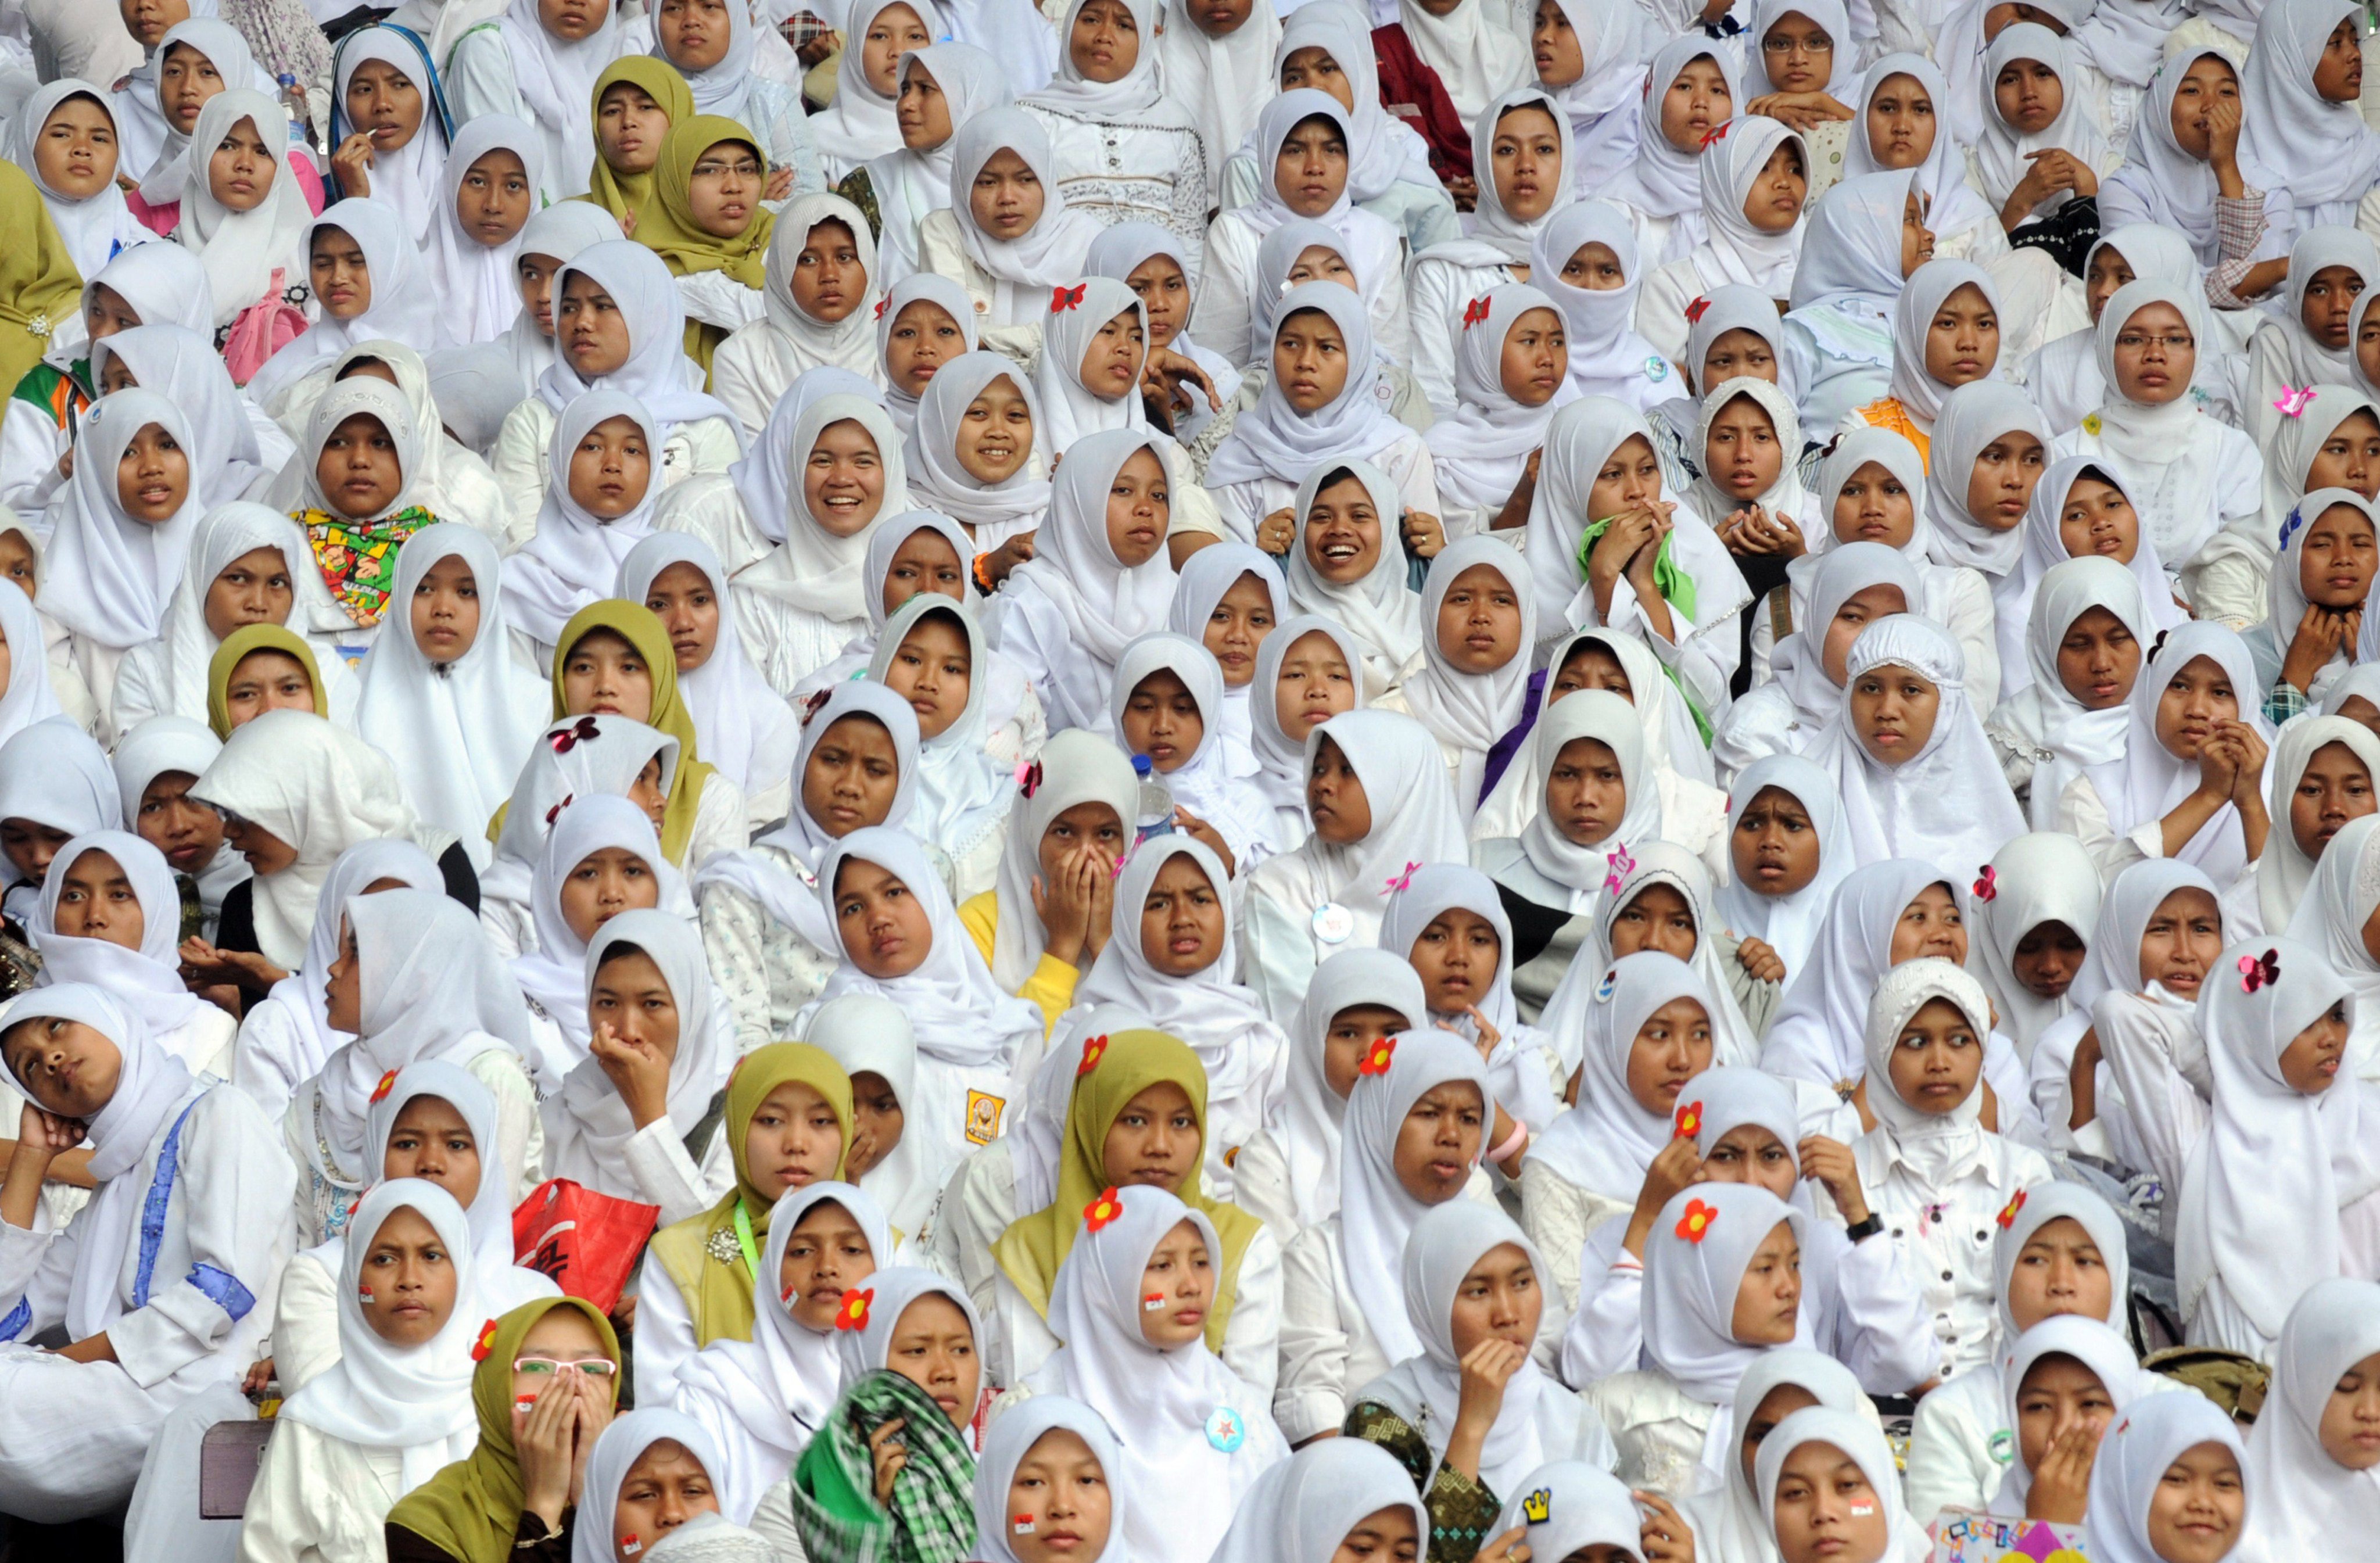 Young women attending a ceremony at a stadium in Jakarta. Experts say extremist groups prey on young women and manipulate their emotional vulnerability. Photo: AFP